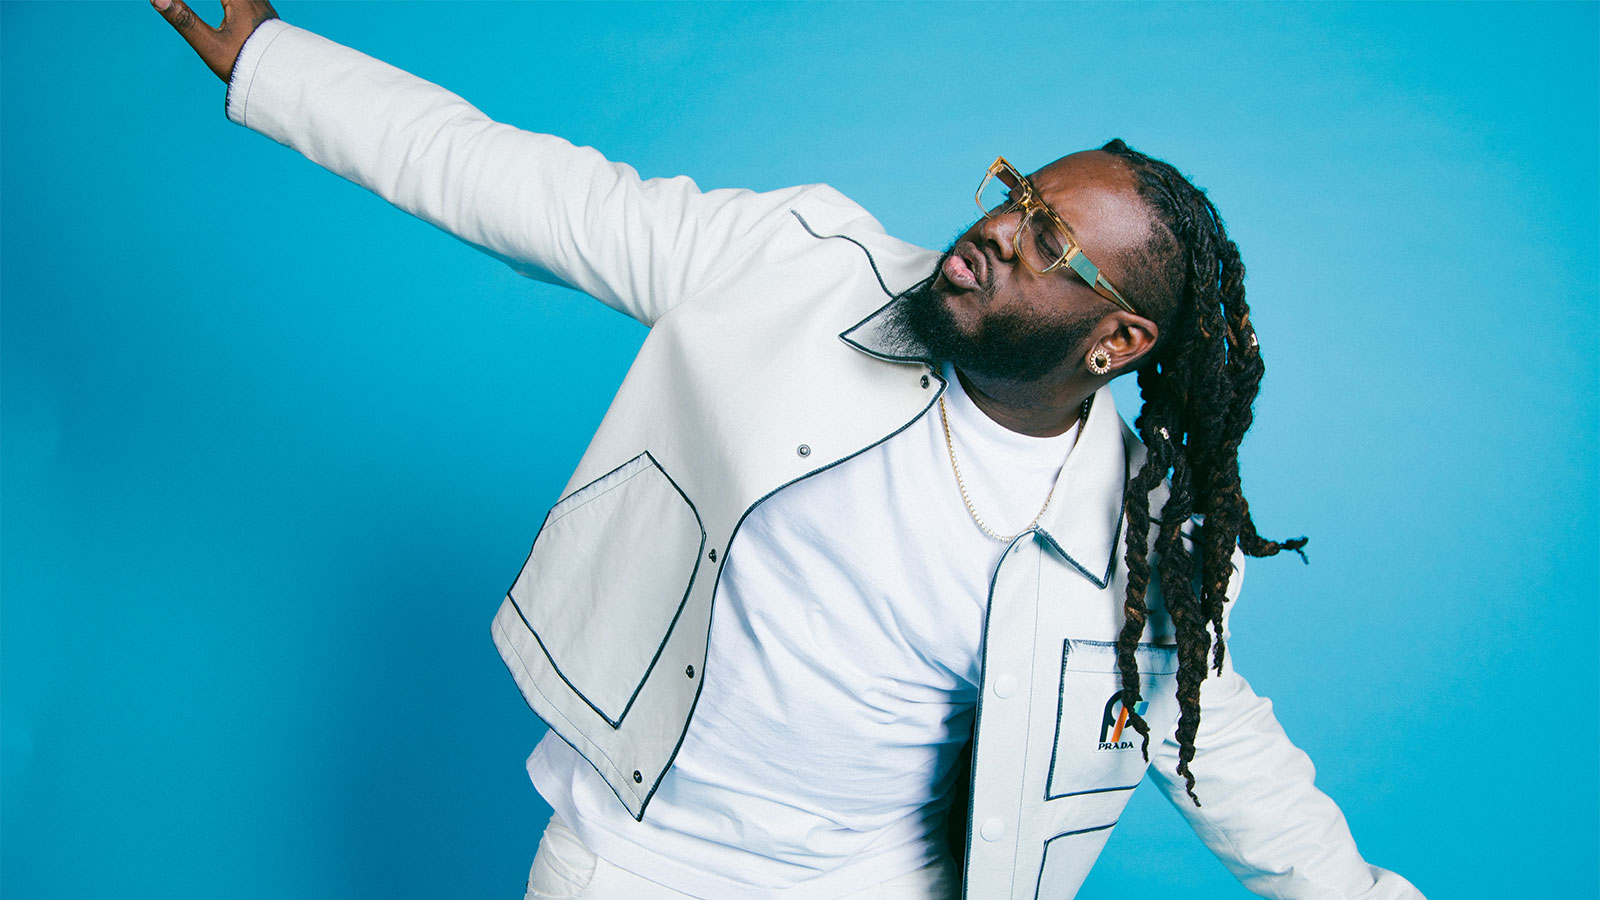 T-Pain wearring a white shirt and white jacket while spreading his arms